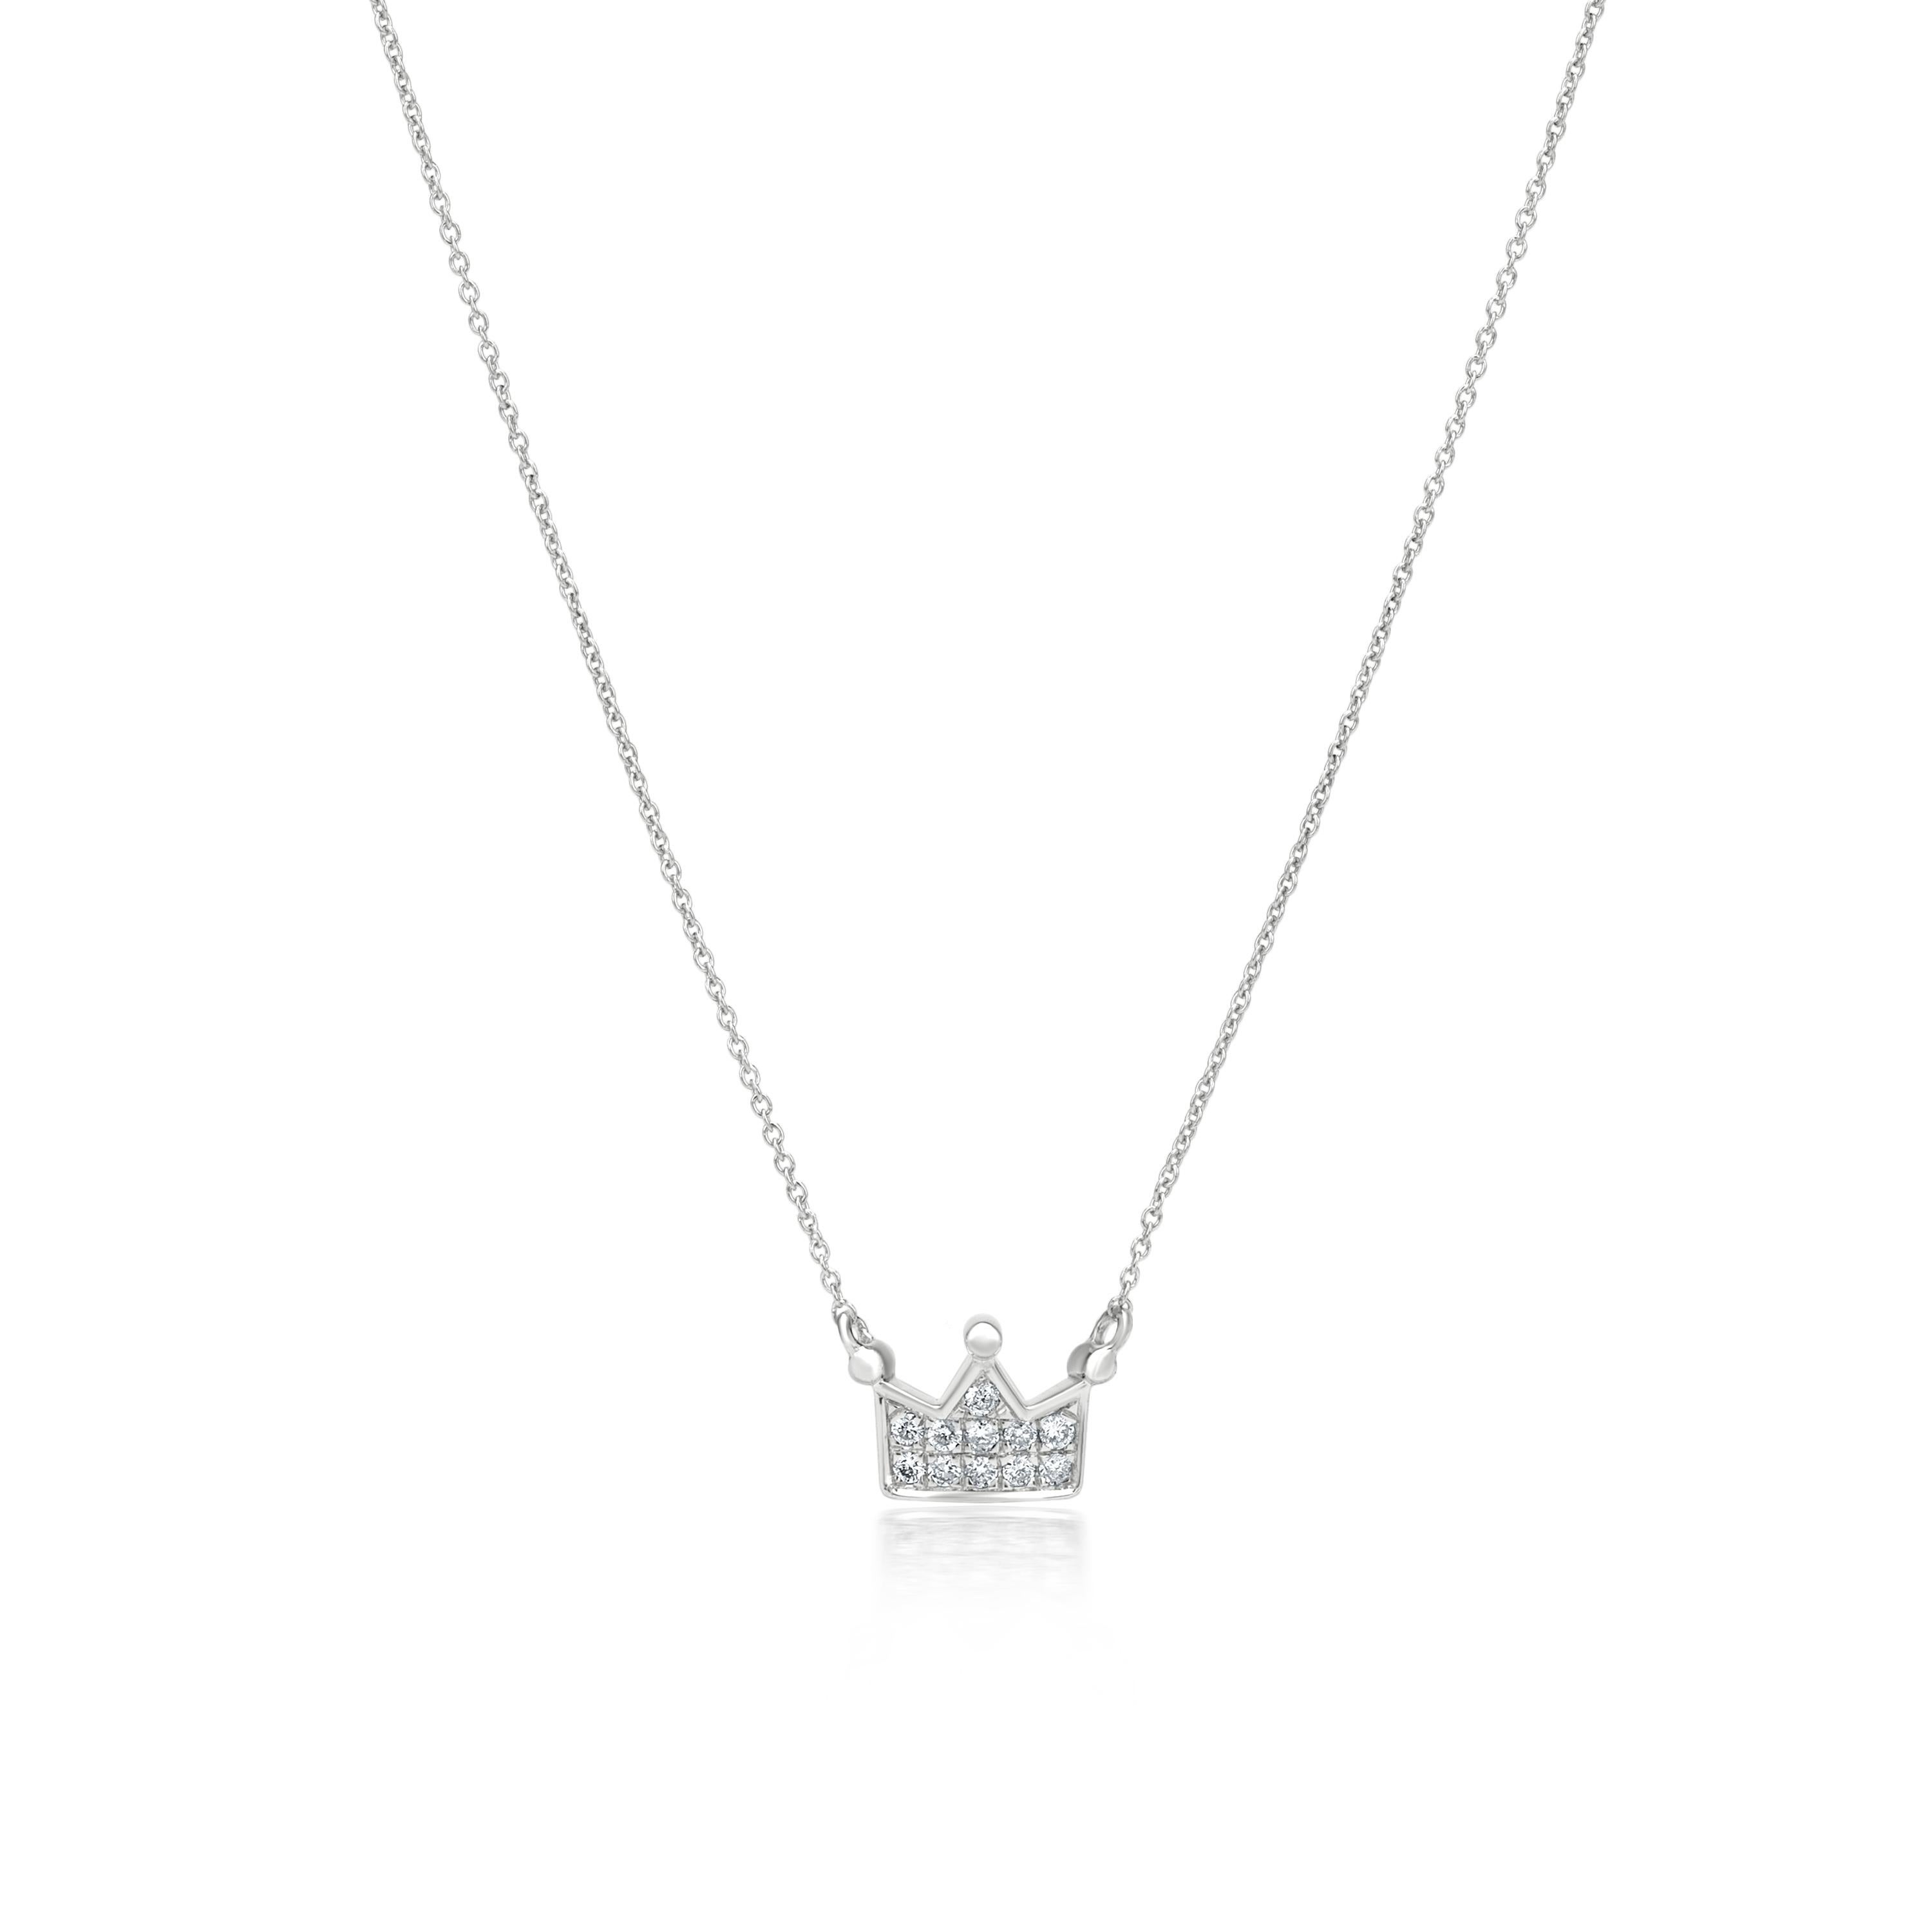 Grace your neckline with a Luxle crown pendant a symbol of glory, power, immortality, sovereignty, and royalty. Subtle yet pretty this crown pendant necklace is the new fashion statement This necklace is featured with 11 round cut diamonds, totaling